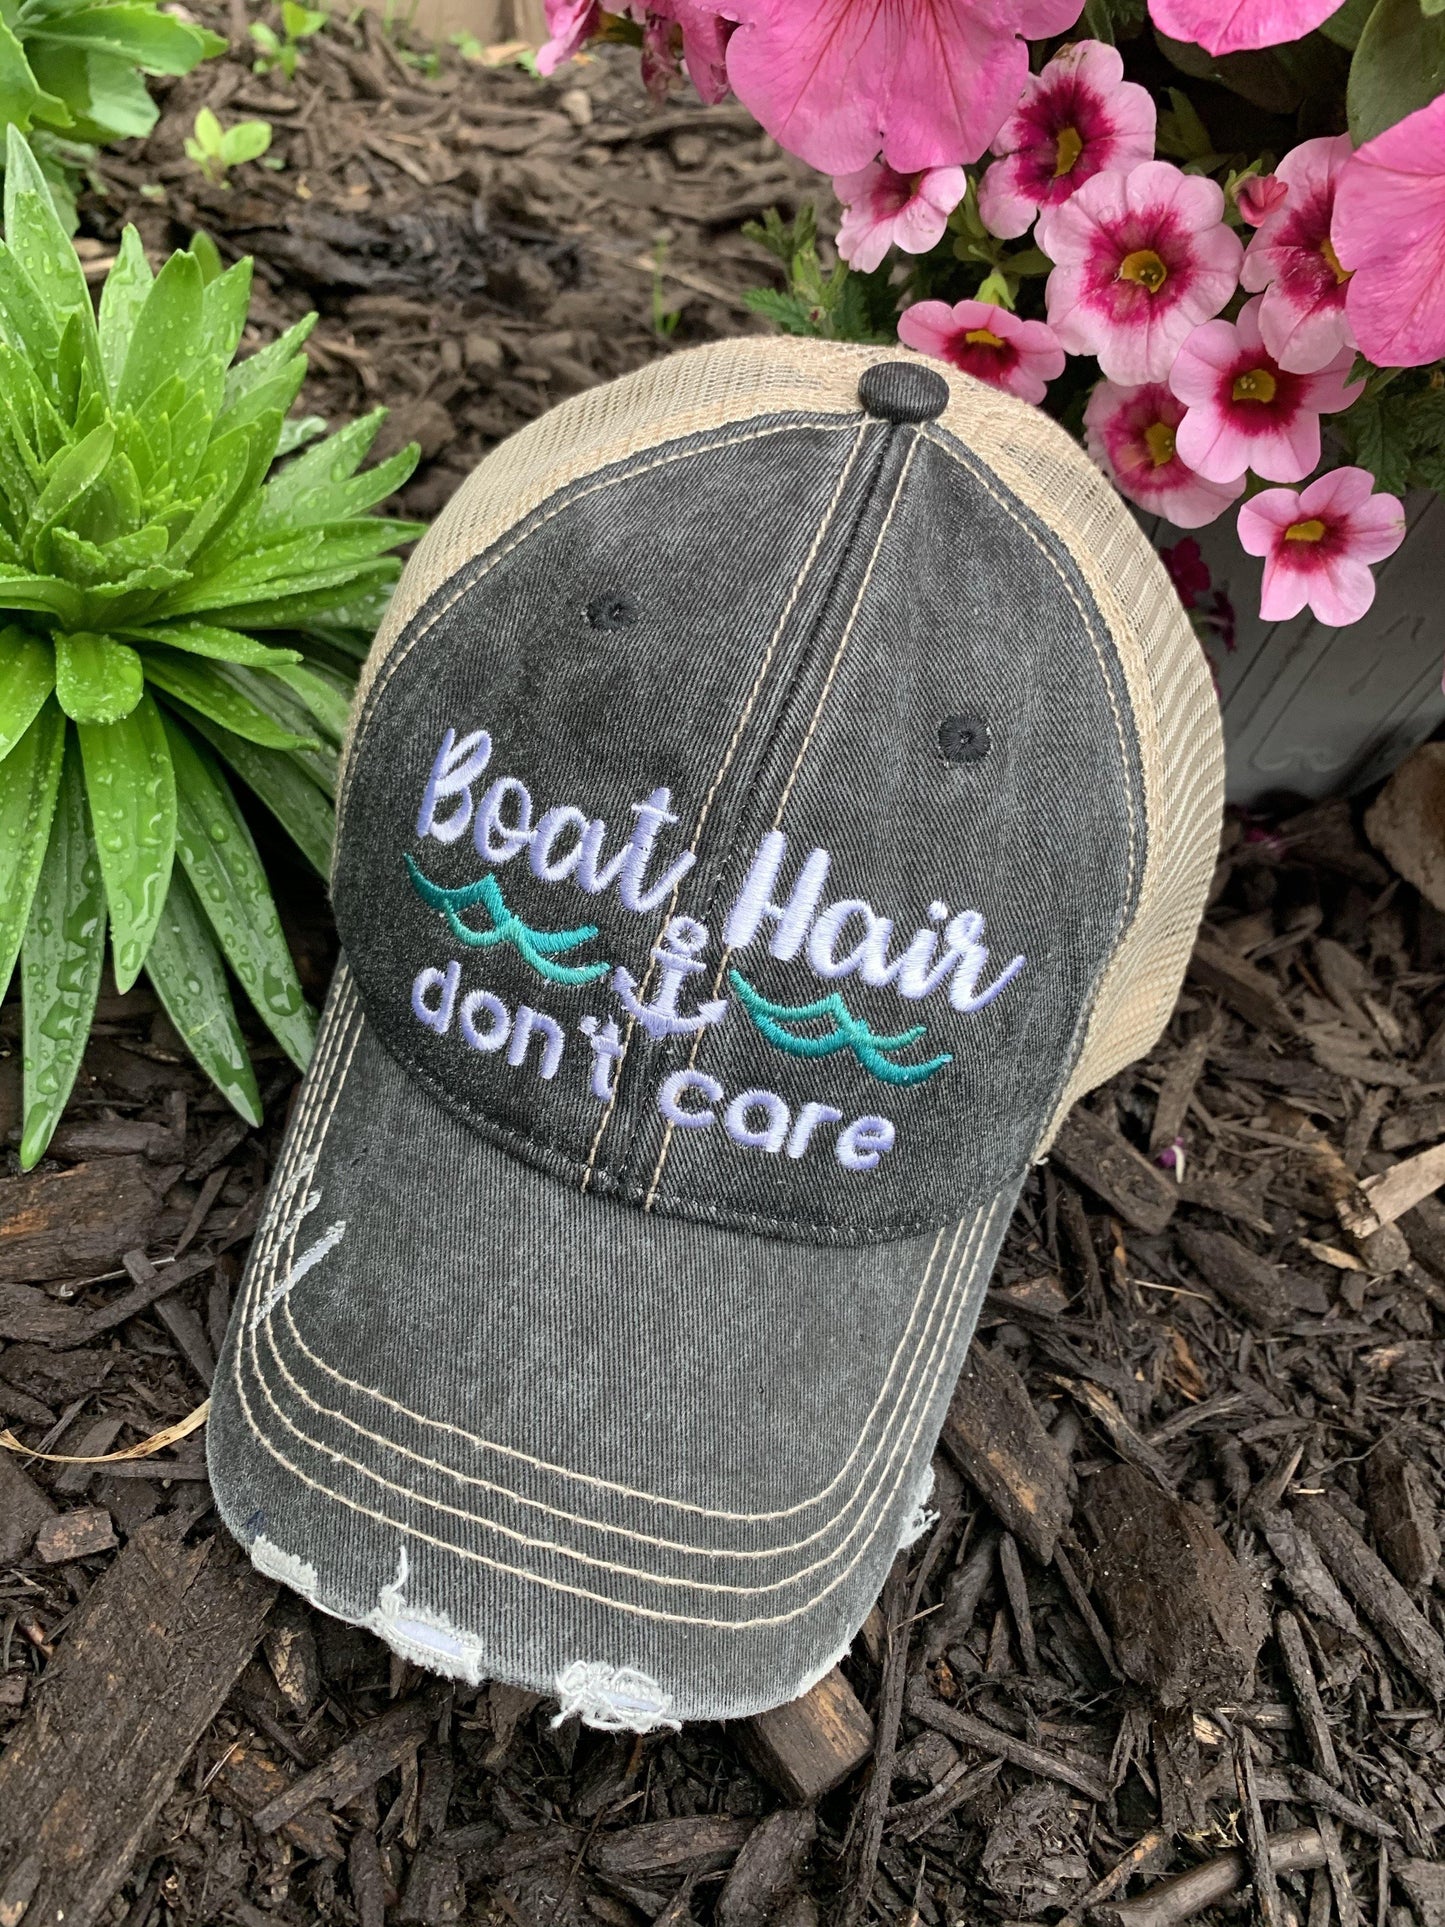 Boat hats! Boat hair don’t care • Black embroidered trucker cap • Adjustable mesh back - Stacy's Pink Martini Boutique